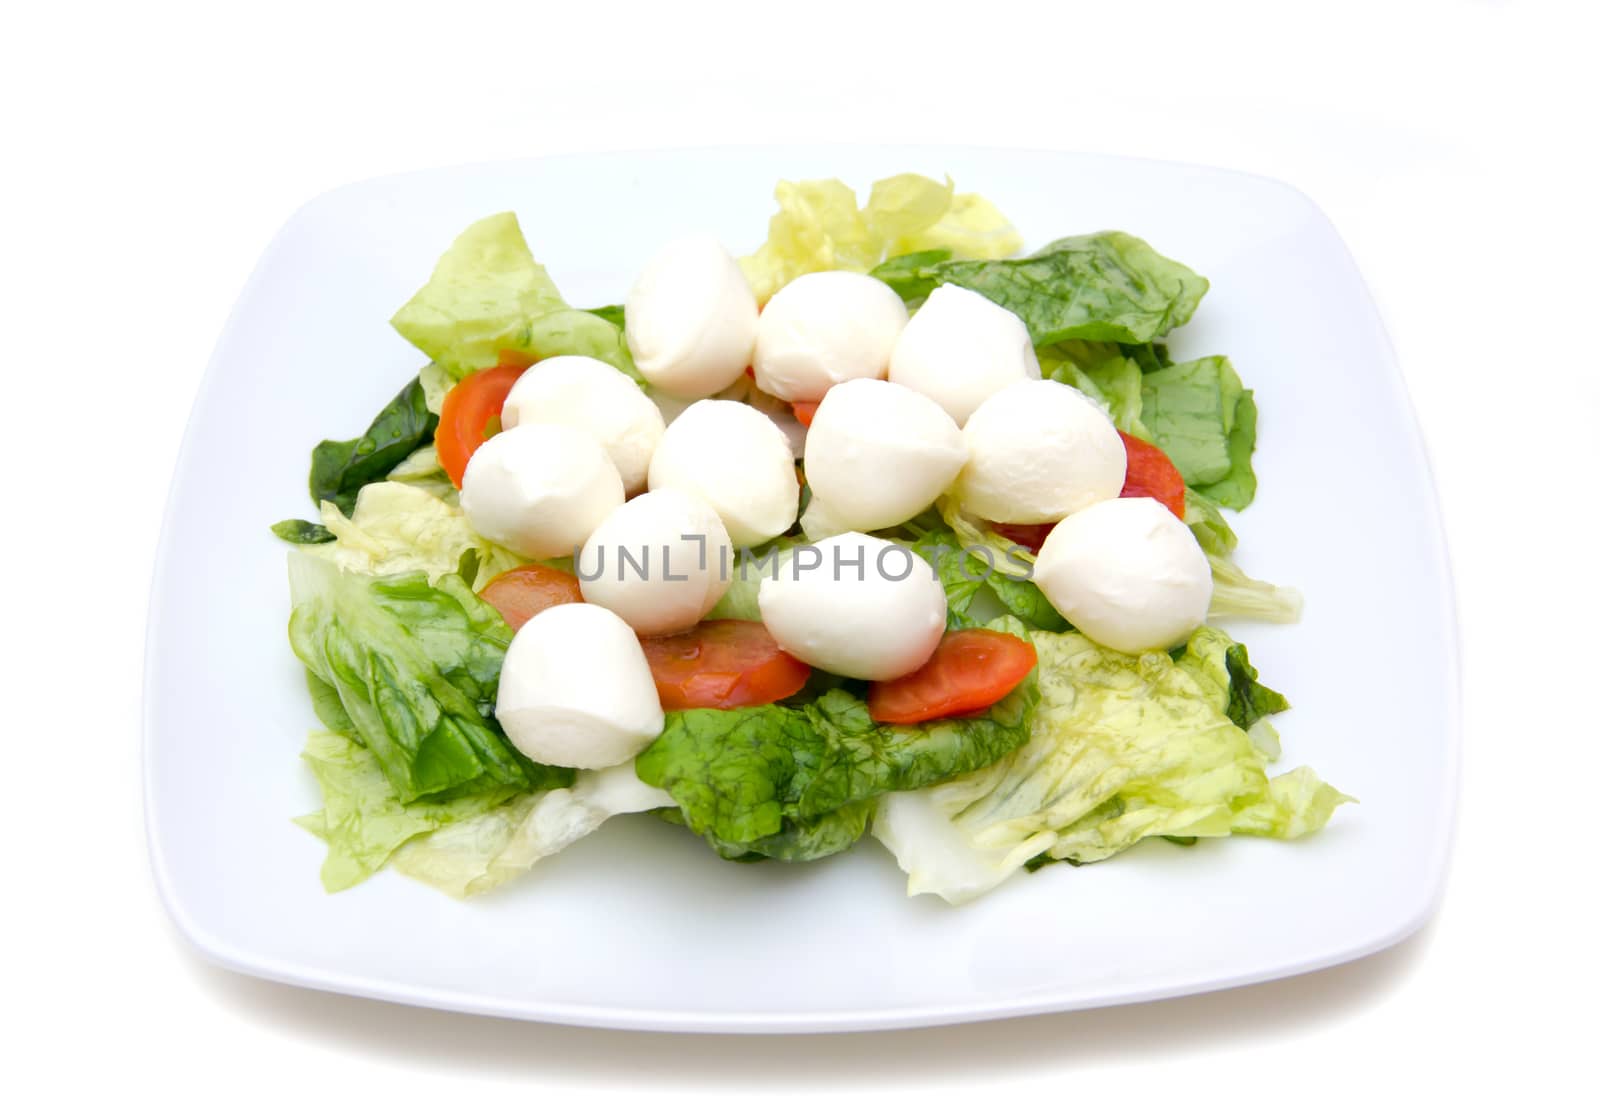 Salad with tomatoes and mozzarella by spafra